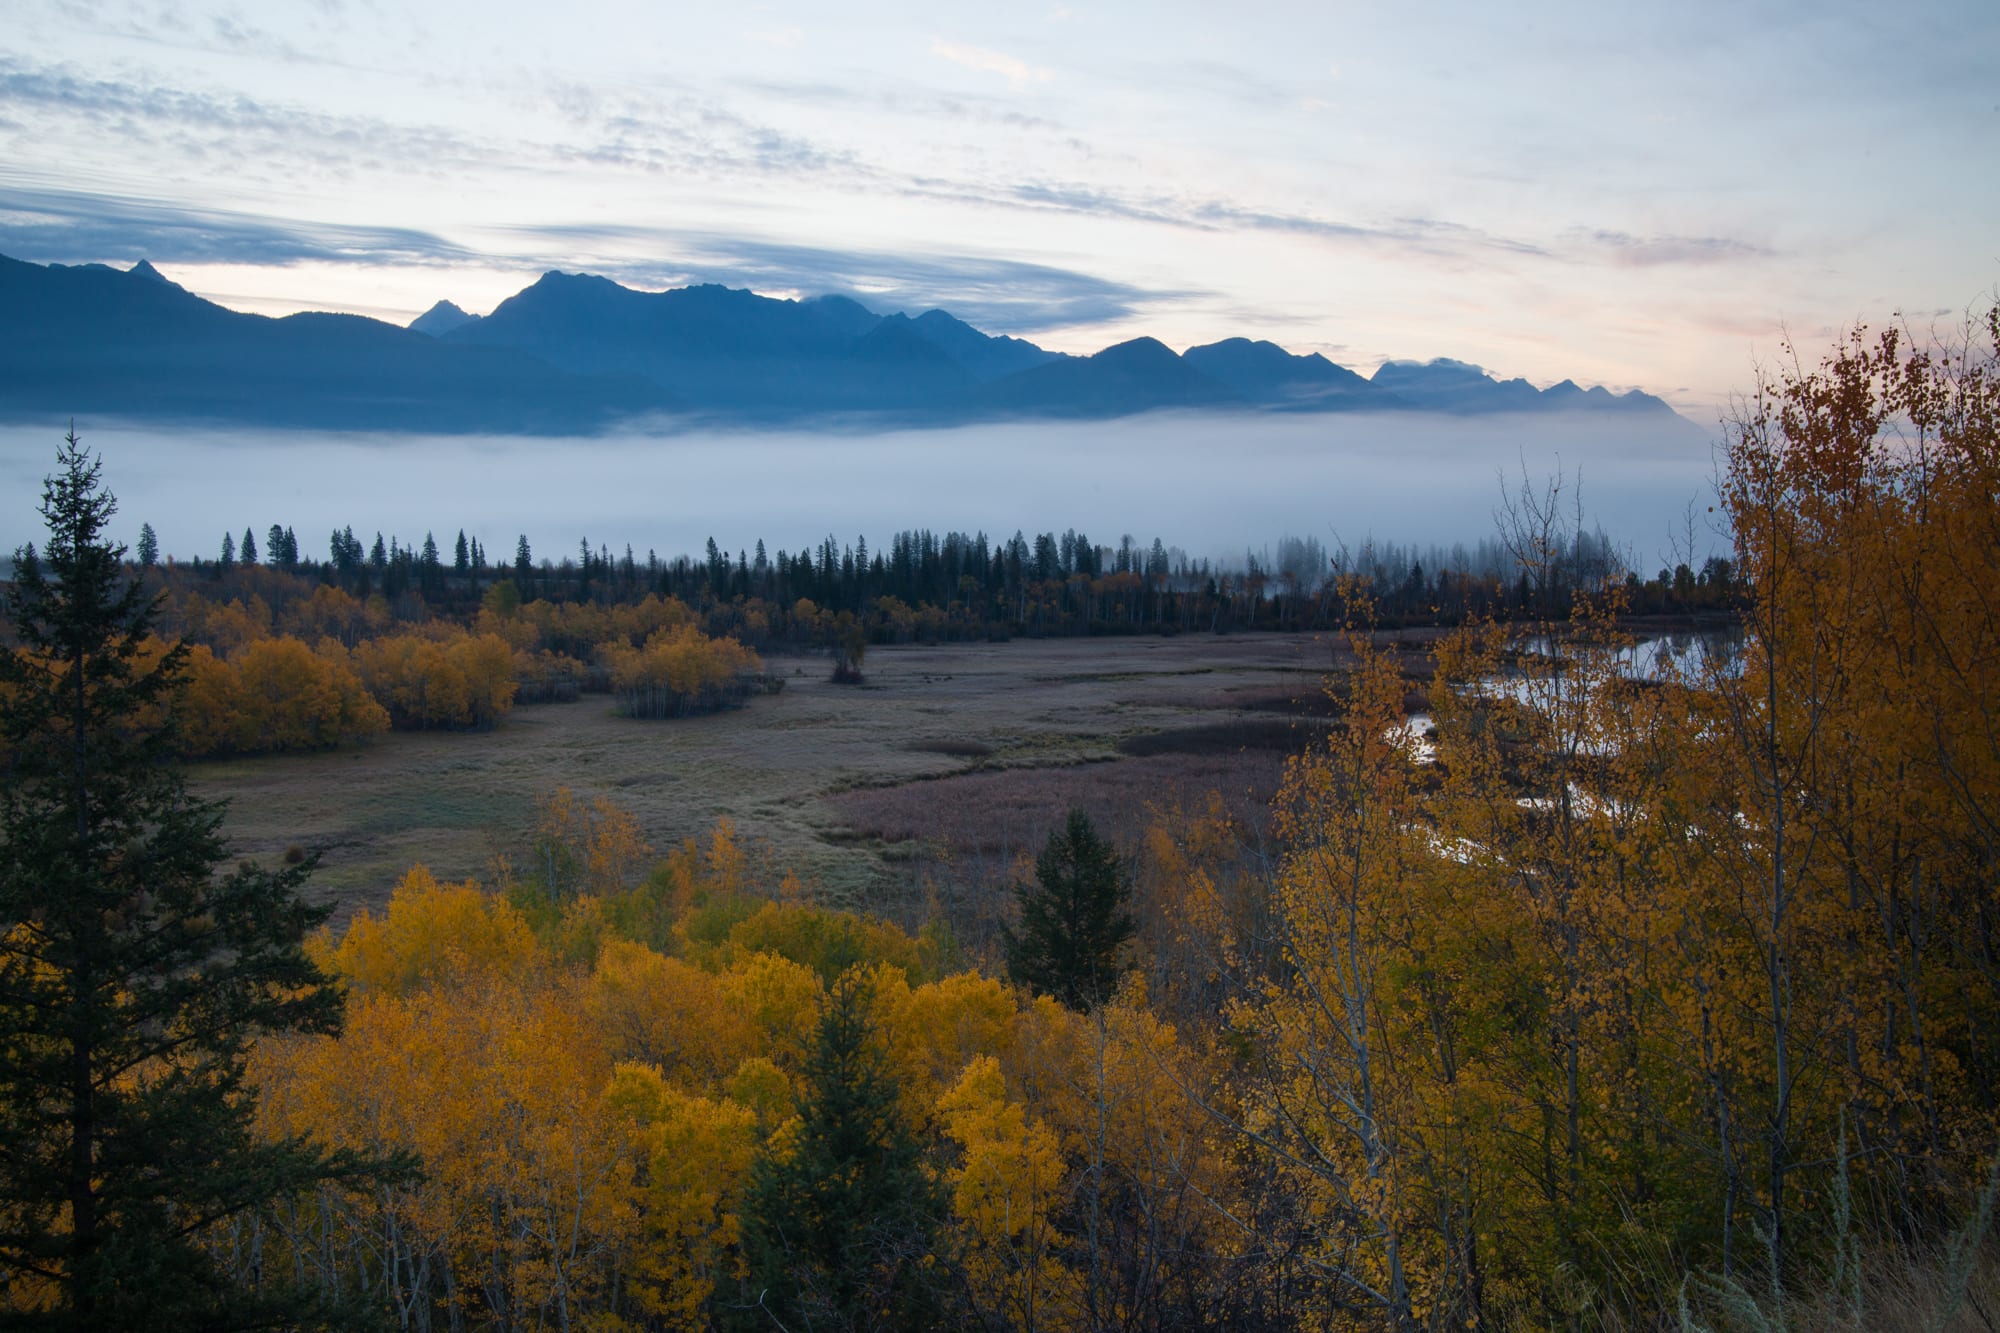 Columbia Valley along the Kootenay river with fall coloured leaves in the foreground and fog and mountains in the background